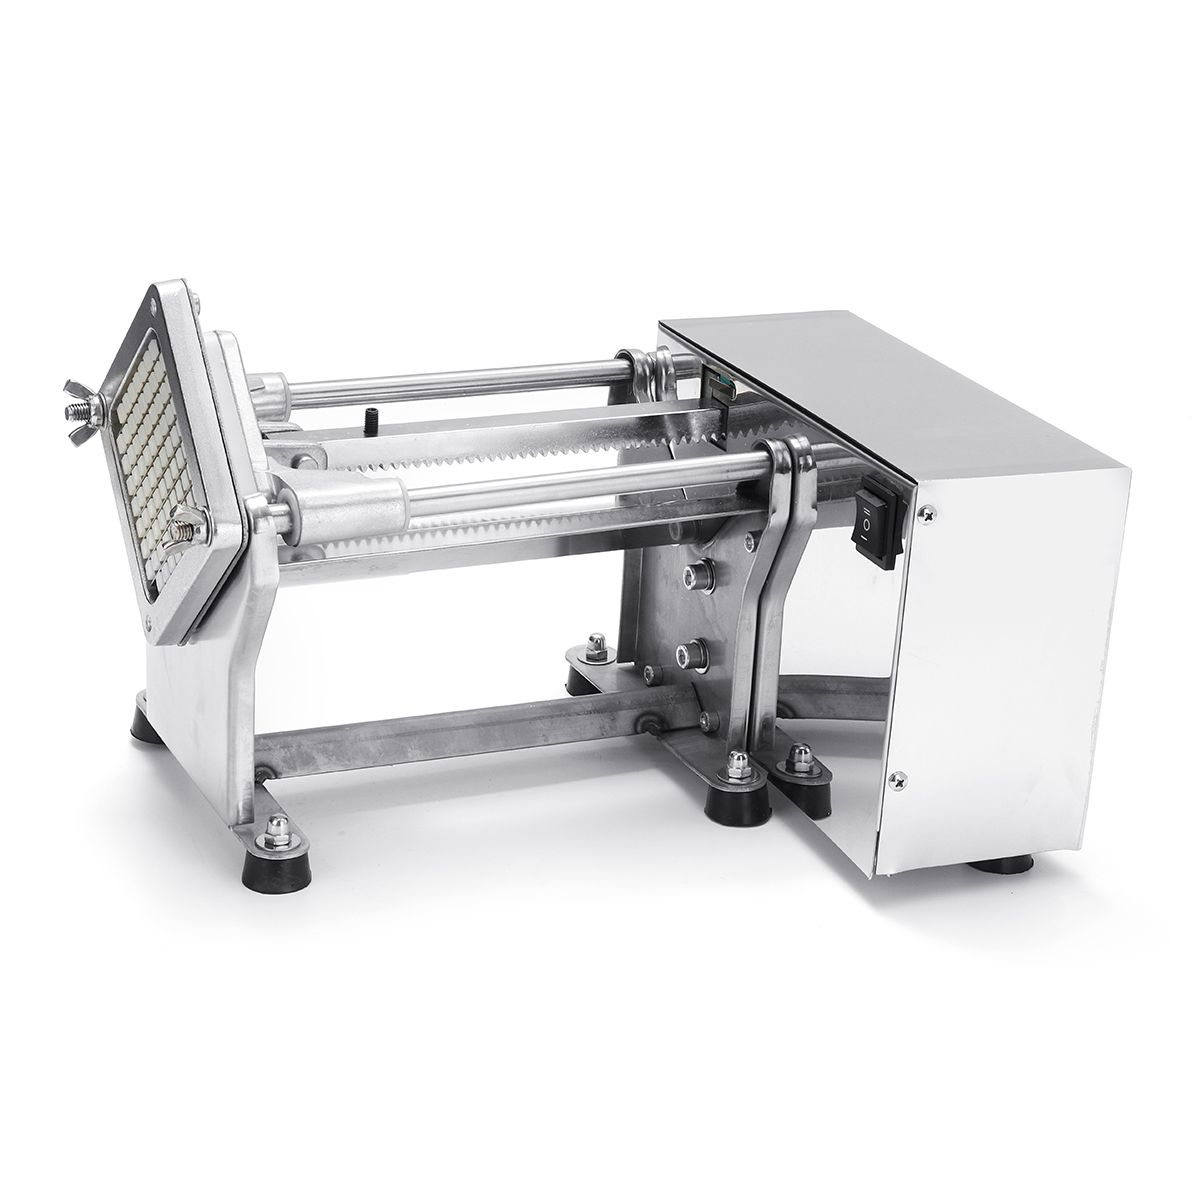 220V-Electric-Potato-Chip-Cutter-French-Fries-Cutting-Slicer-Stainless-Steel-Machine-1414256